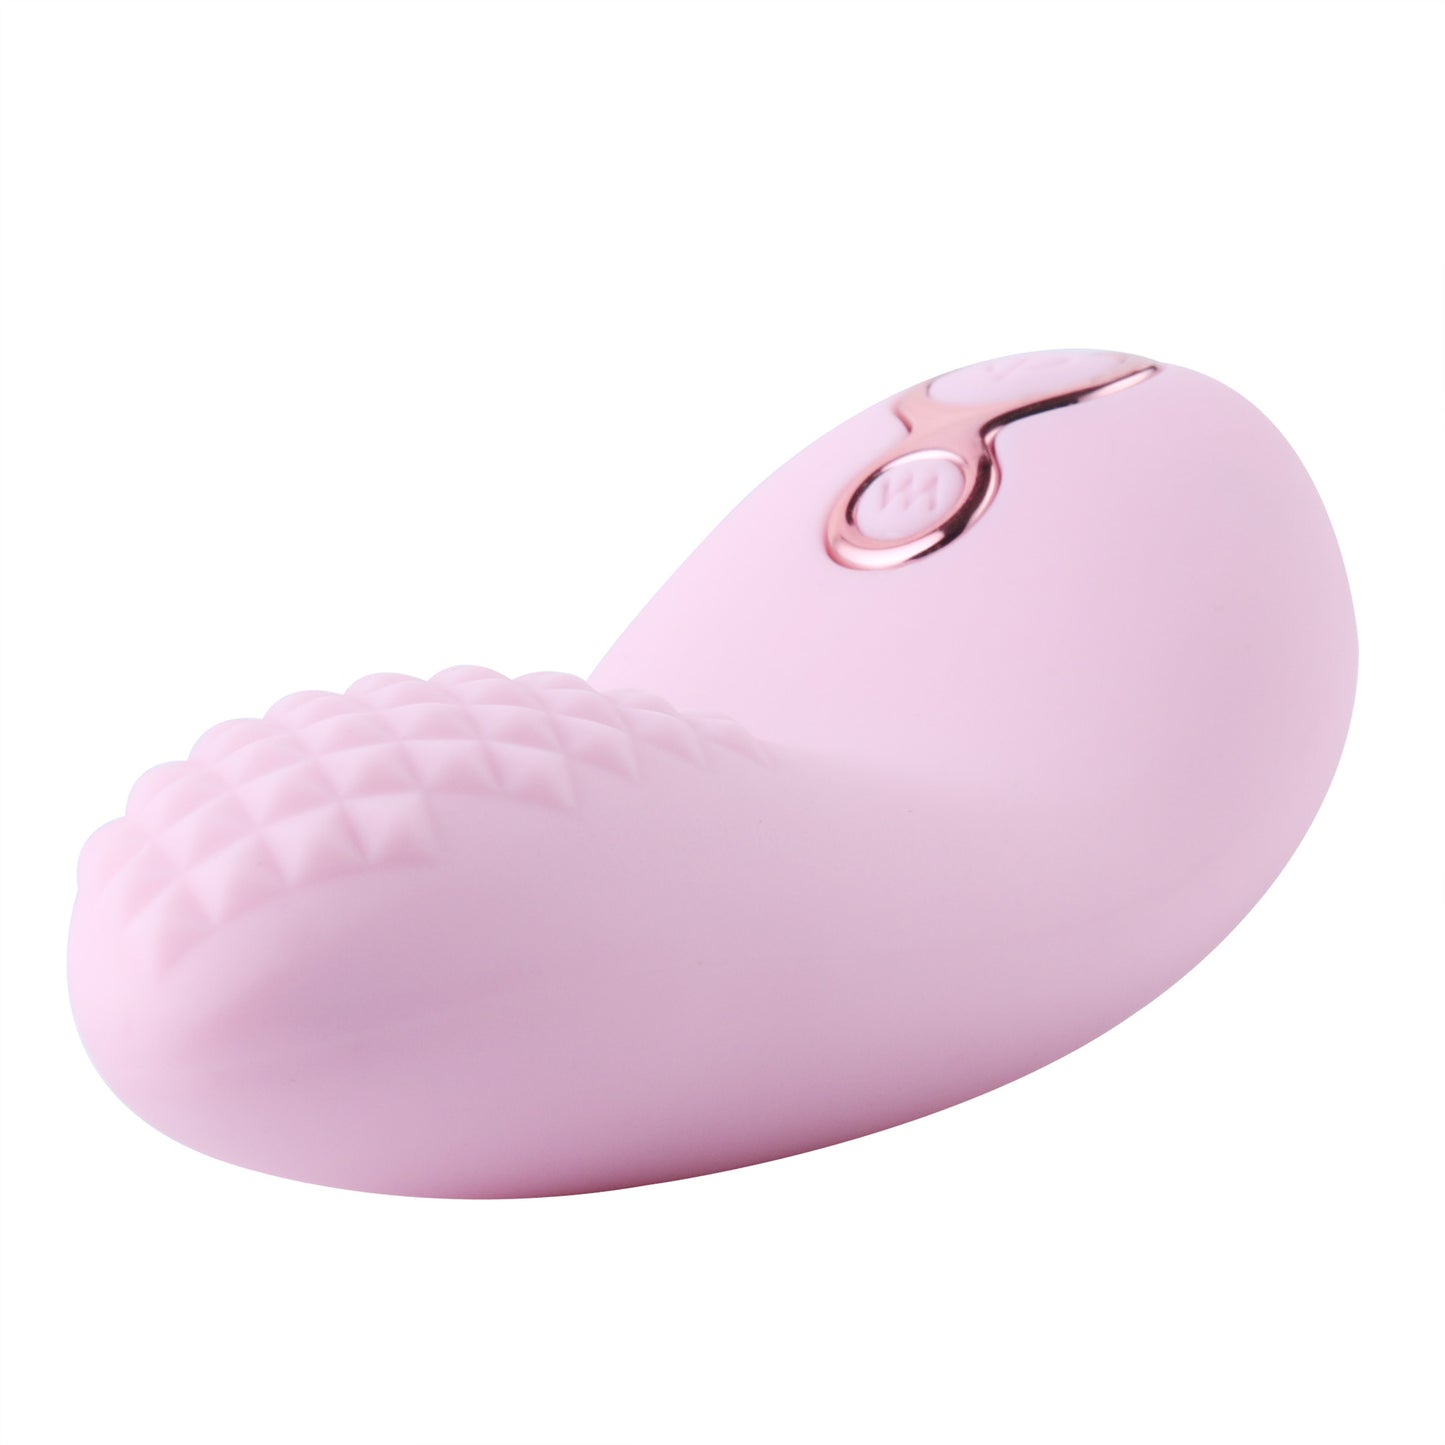 Tongue-shaped Vibrator with 9 positions USB rechargeable